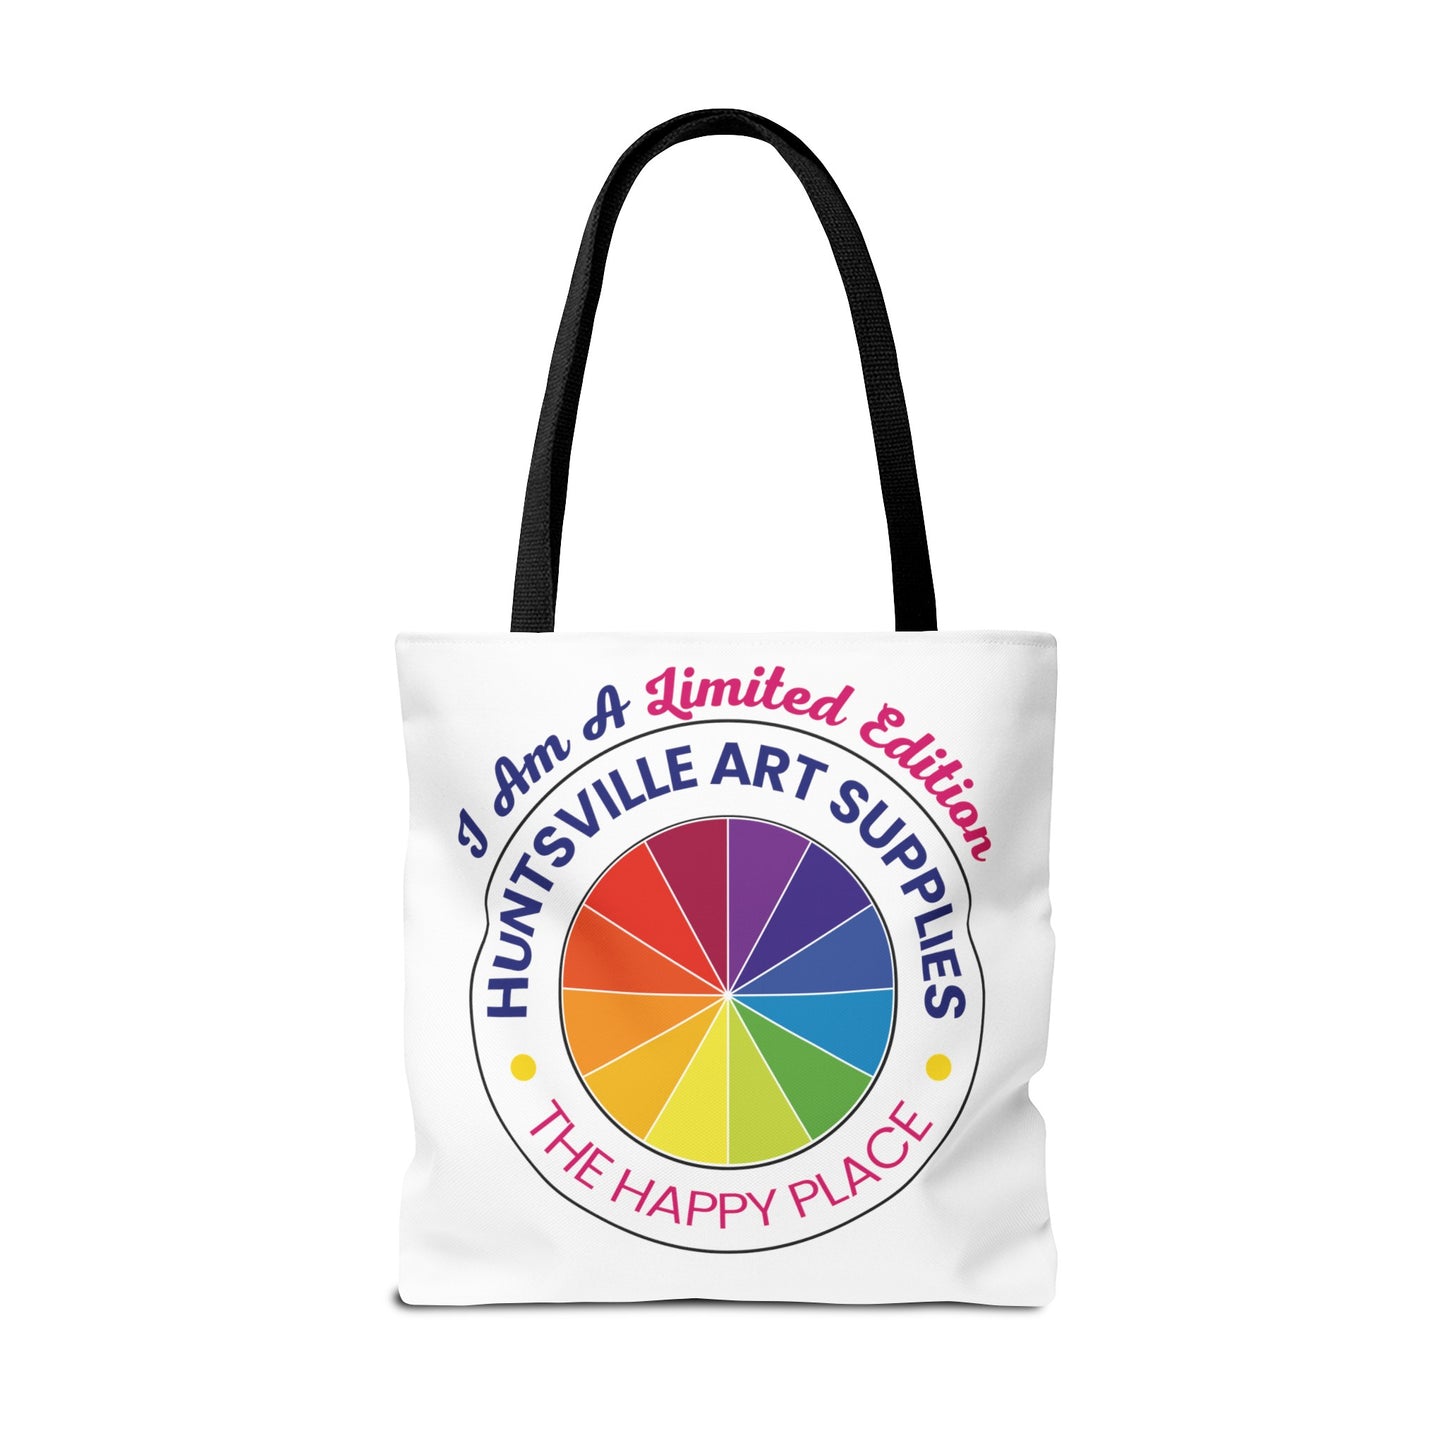 I Am A Limited Edition - Huntsville Art Supplies Tote - Only 150 Will Be Made